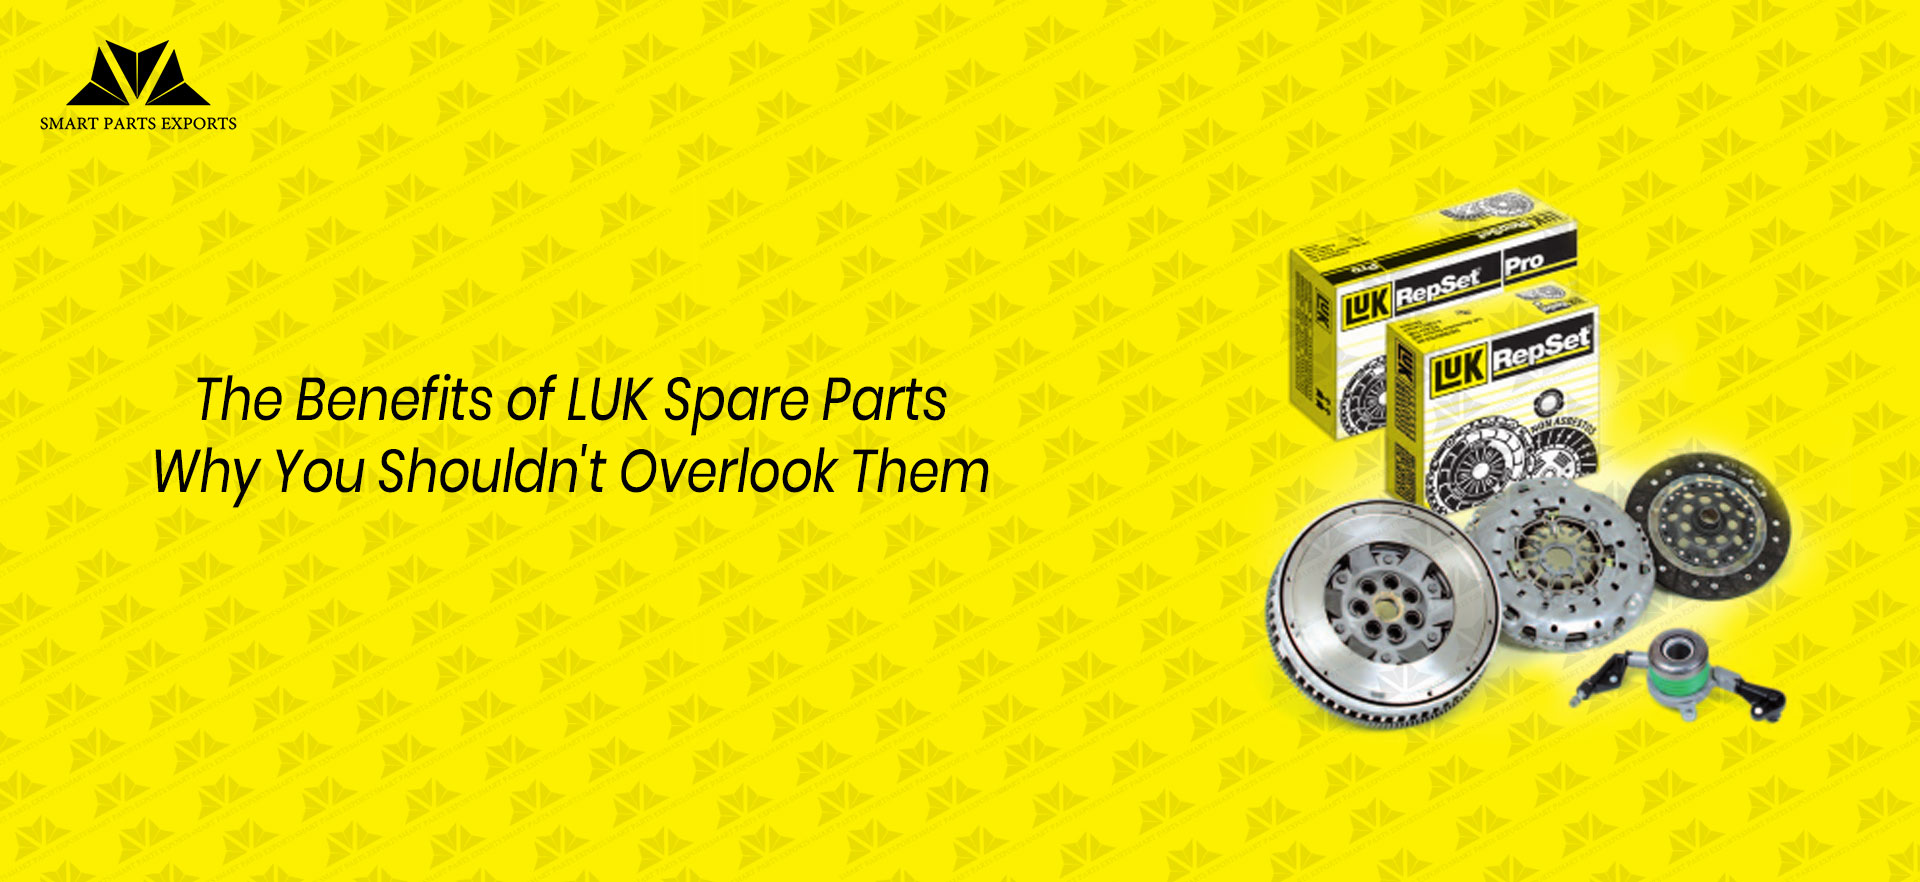 The Benefits of LUK Spare Parts: Why You Shouldn't Overlook Them